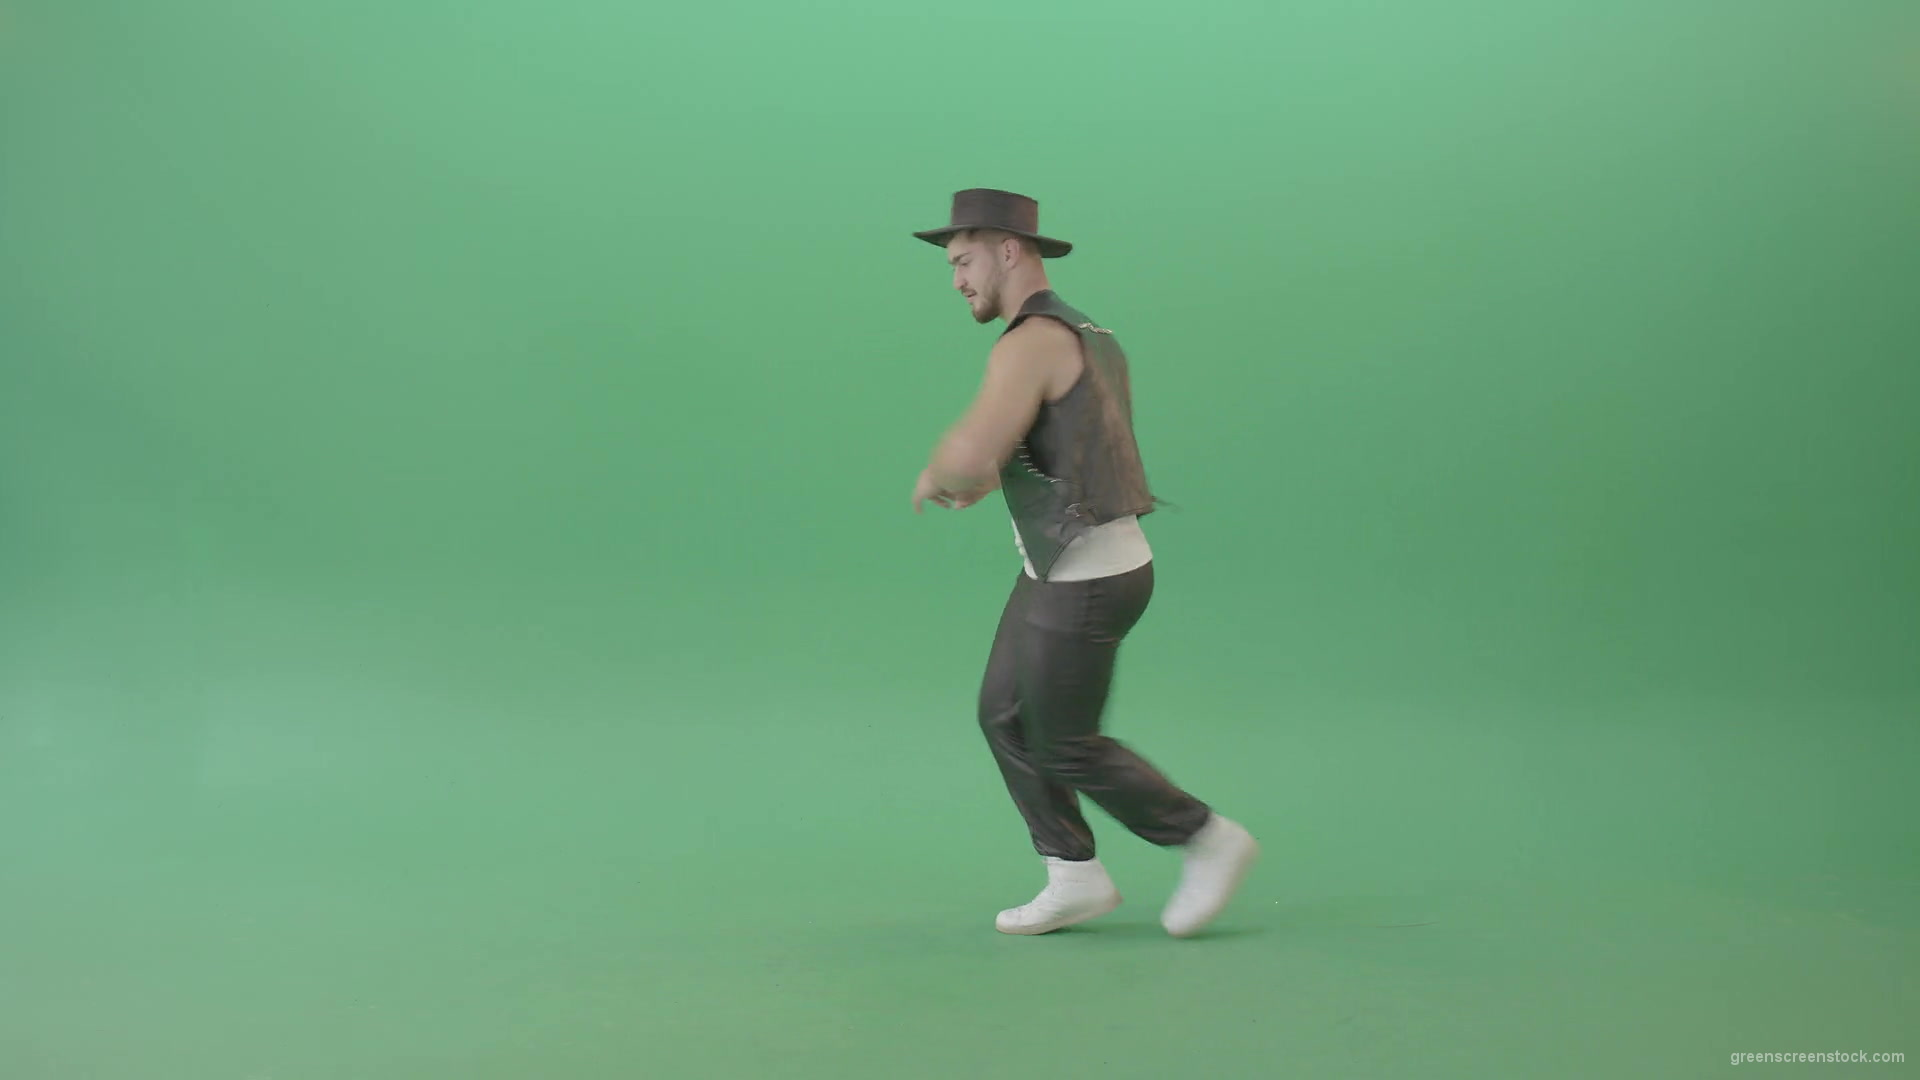 American-Man-with-beard-and-in-black-hat-dancing-Shuffle-isolated-on-Chroma-key-green-screen-4K-Video-Footage-1920_009 Green Screen Stock